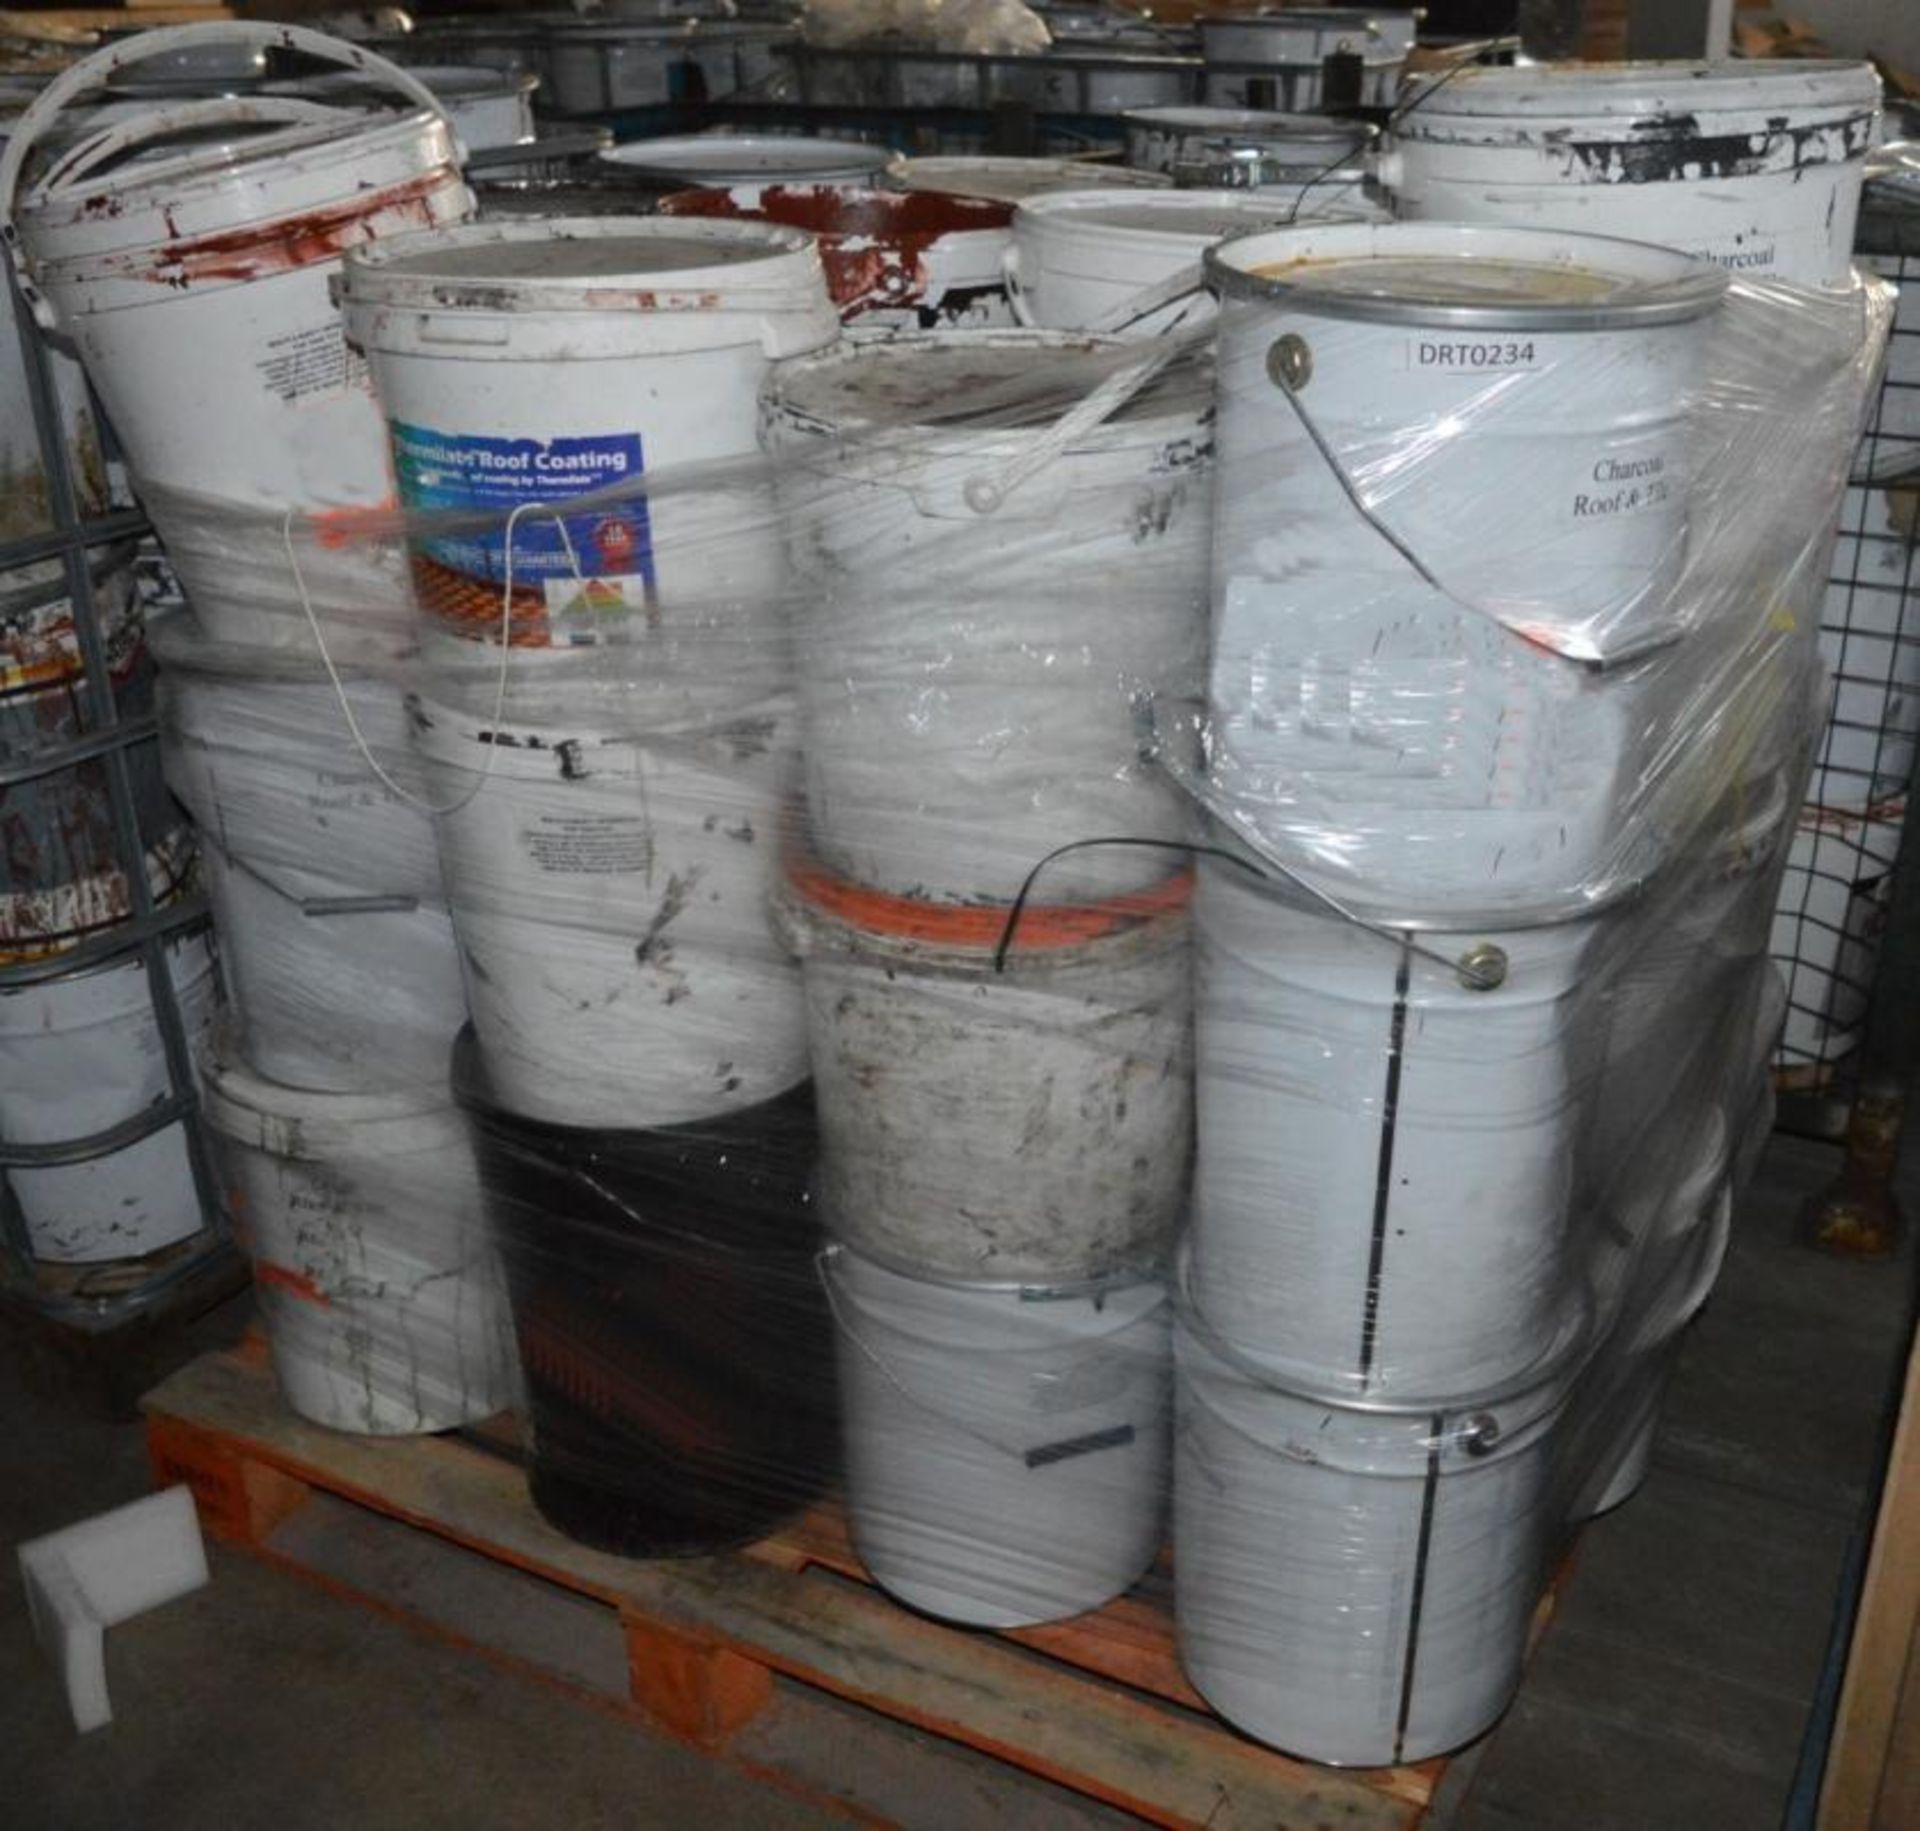 Approx. 36 x 20 Litre Assorted Tins of Paint inc. Roof & Tile, Thermilate + More - Ref: DRT0234 -